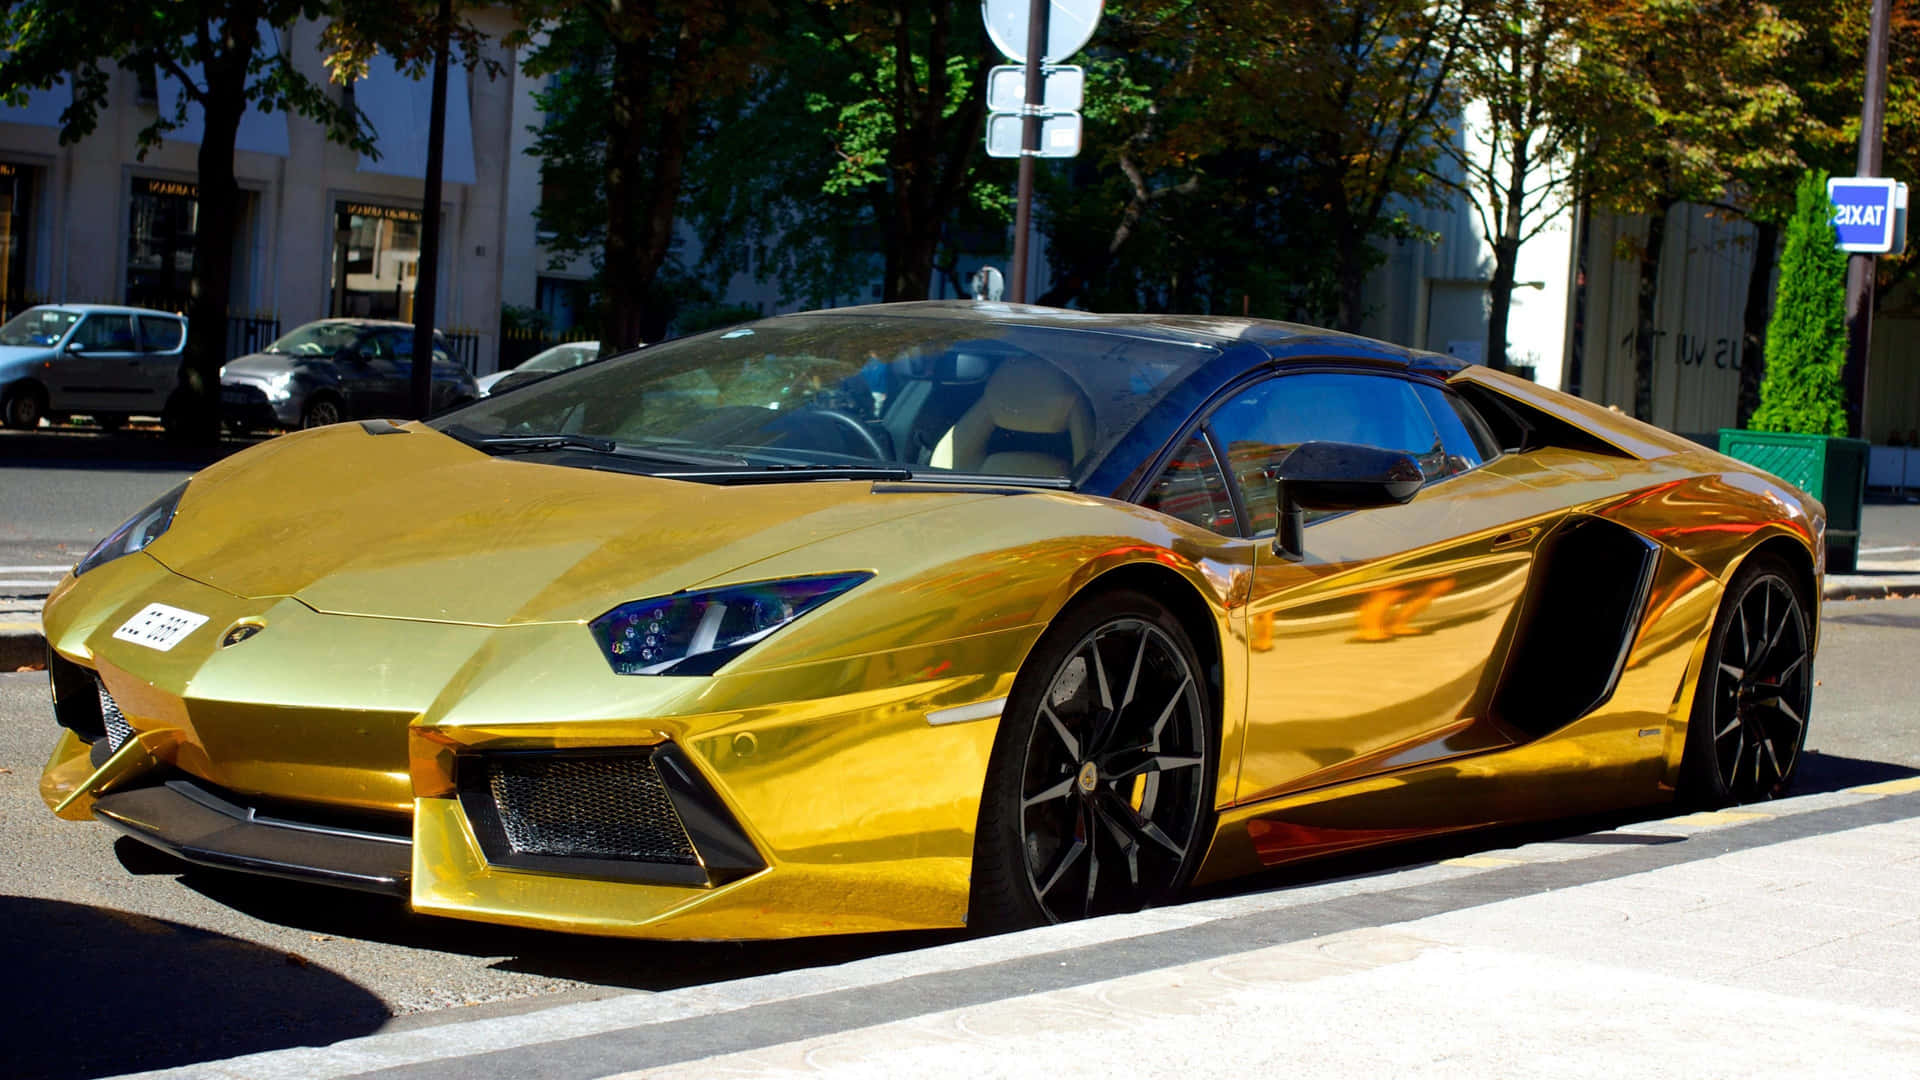 Fancy Gold Lamborghini Spotted On The Streets Wallpaper